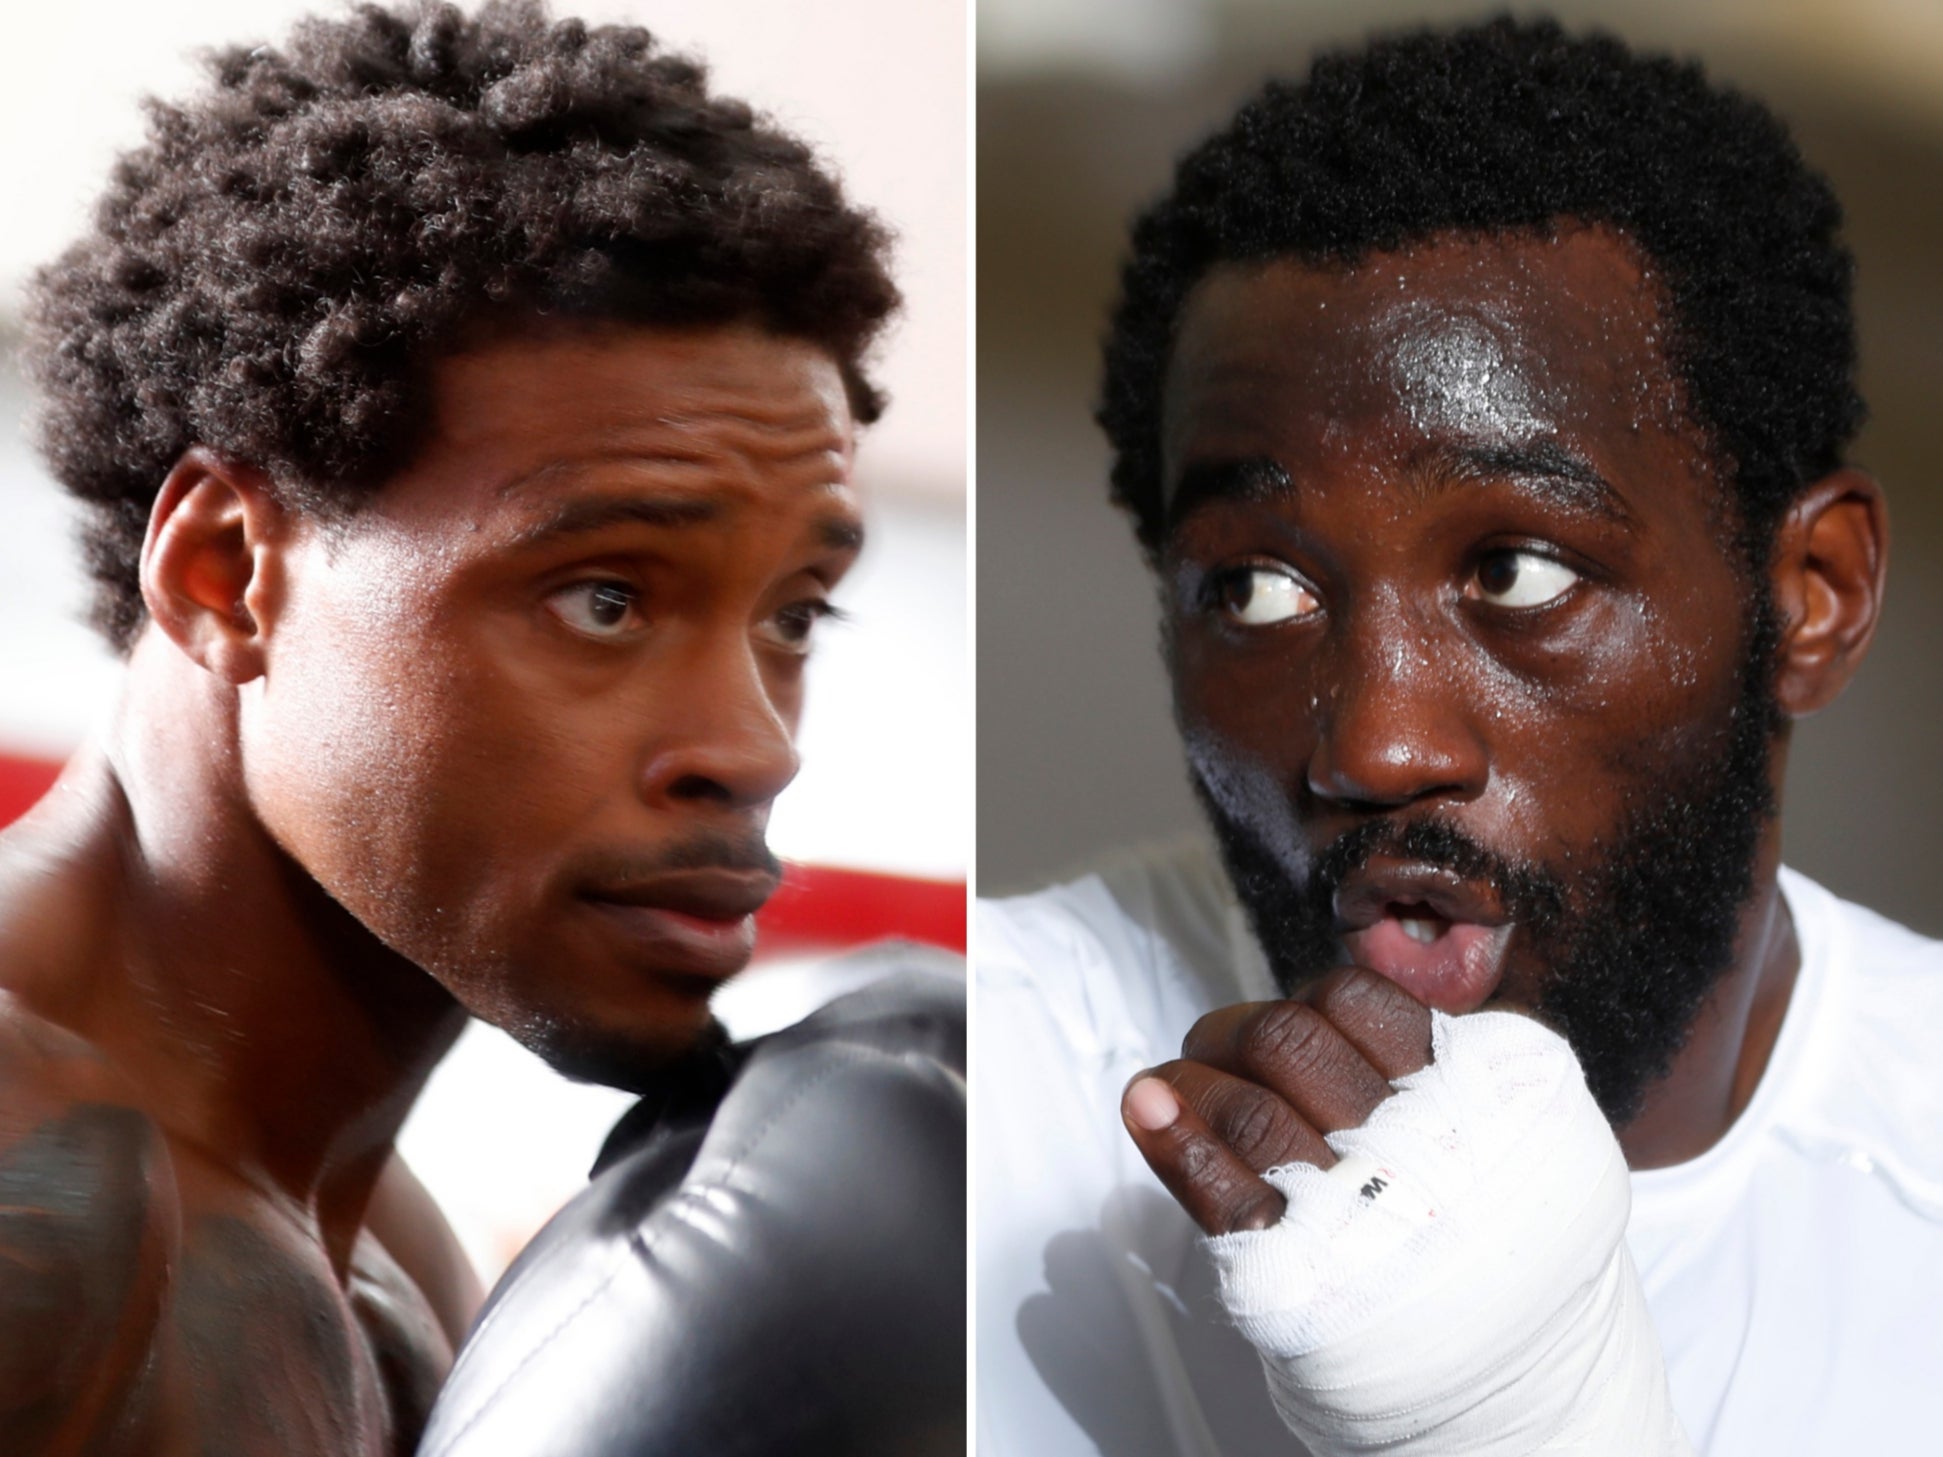 Spence (left) and Crawford are both unbeaten ahead of their undisputed-title fight